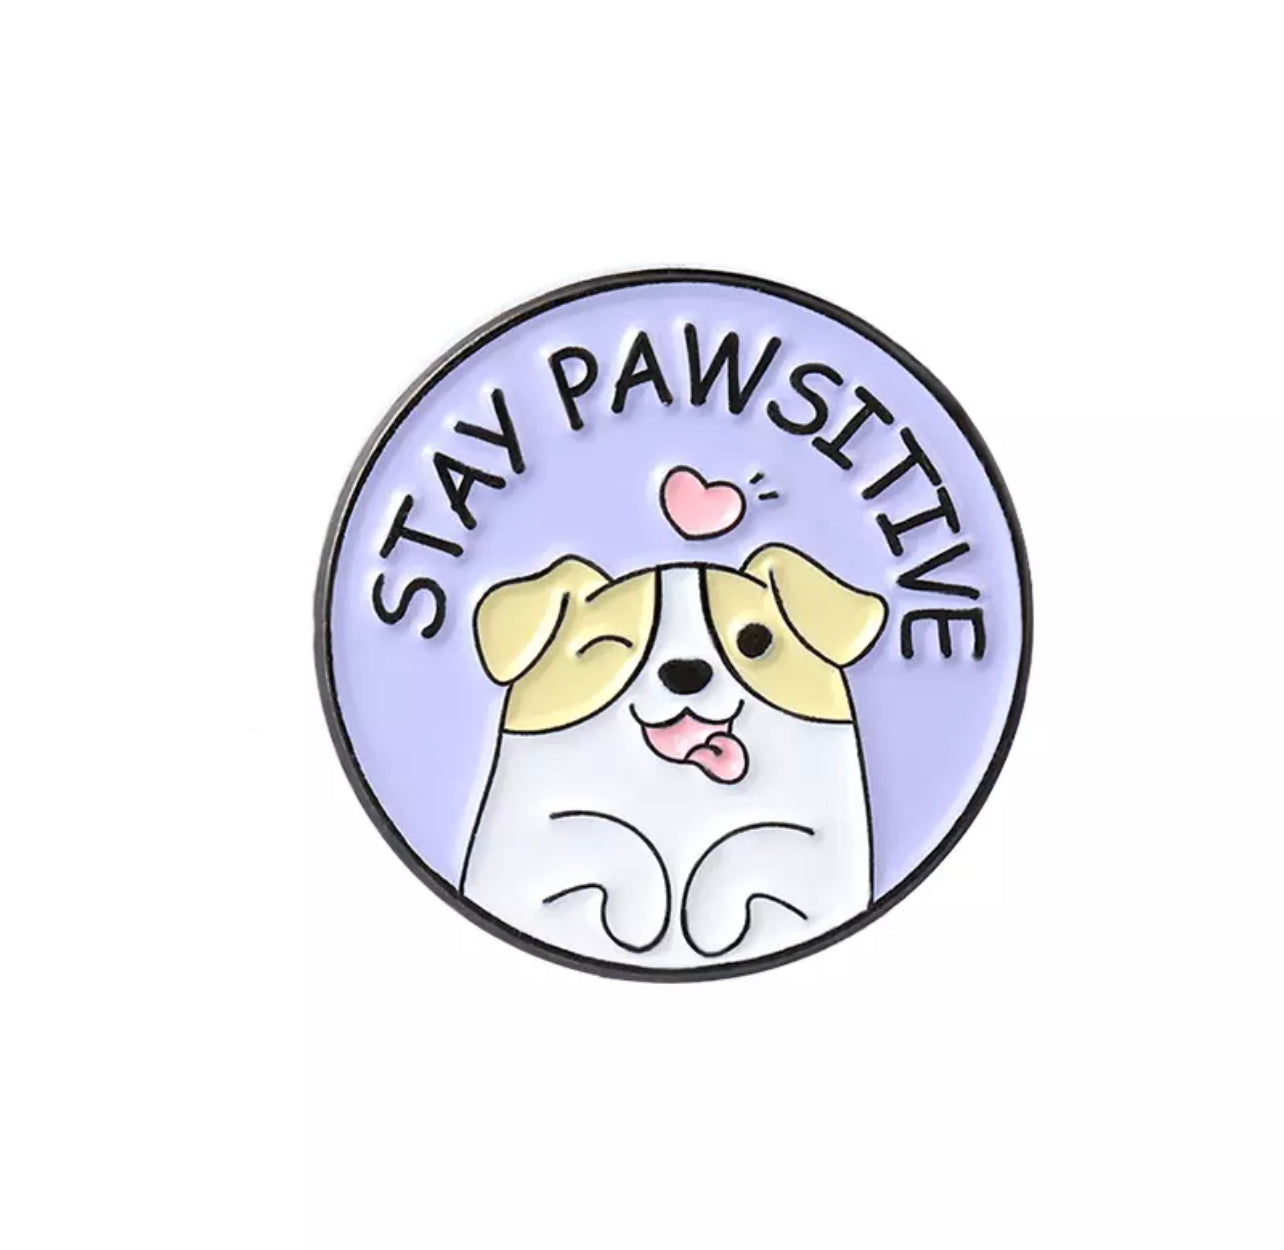 Stay pawsitive (purlpe)